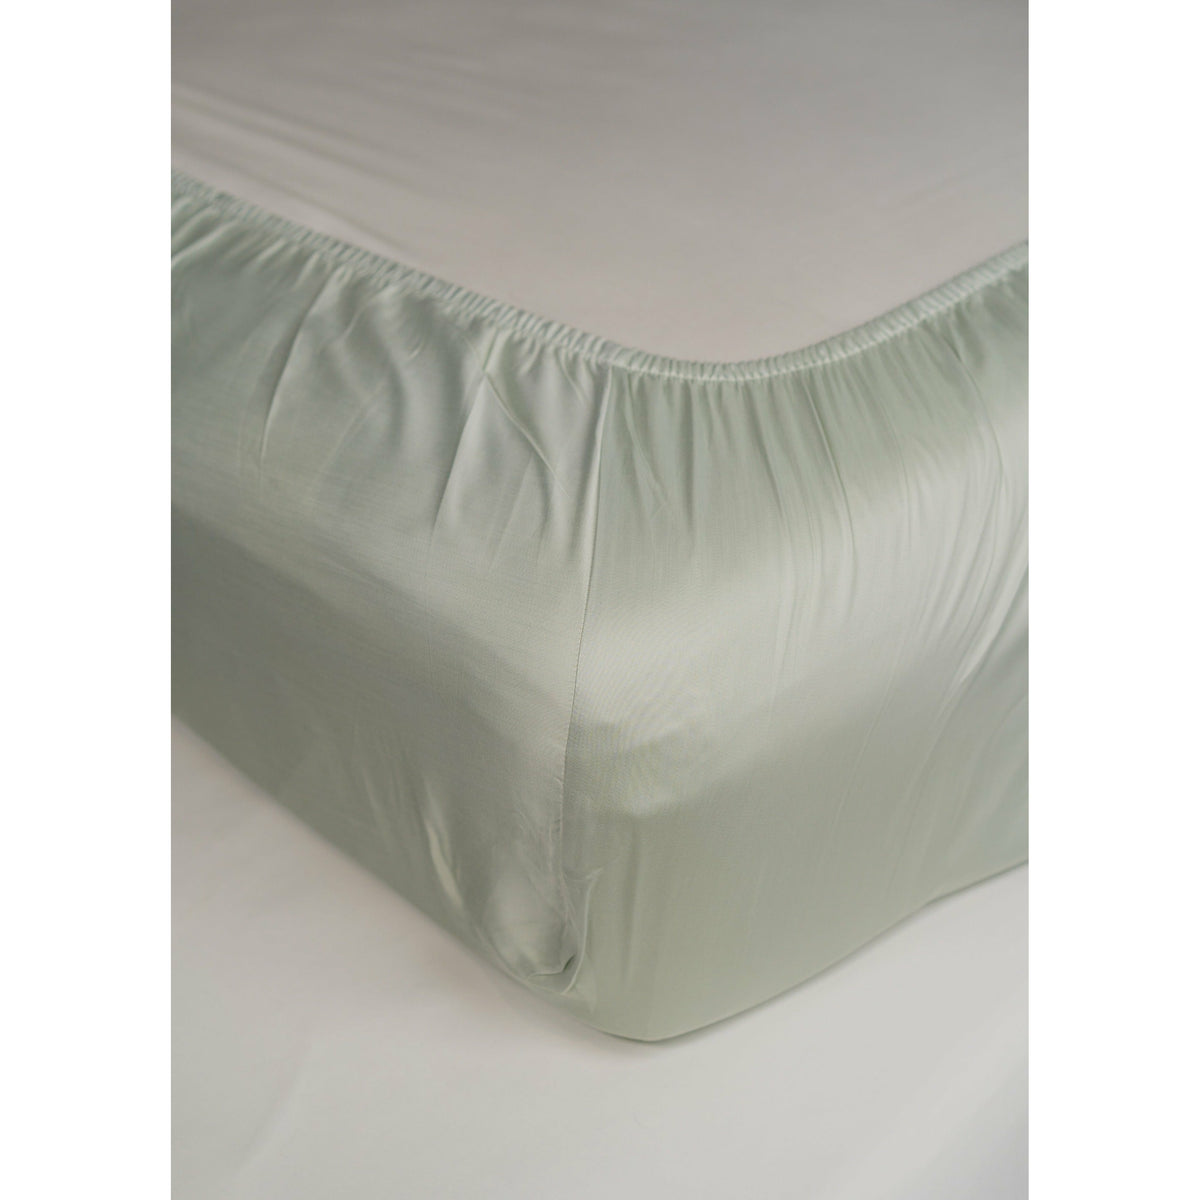 Eucalyptus fitted sheet